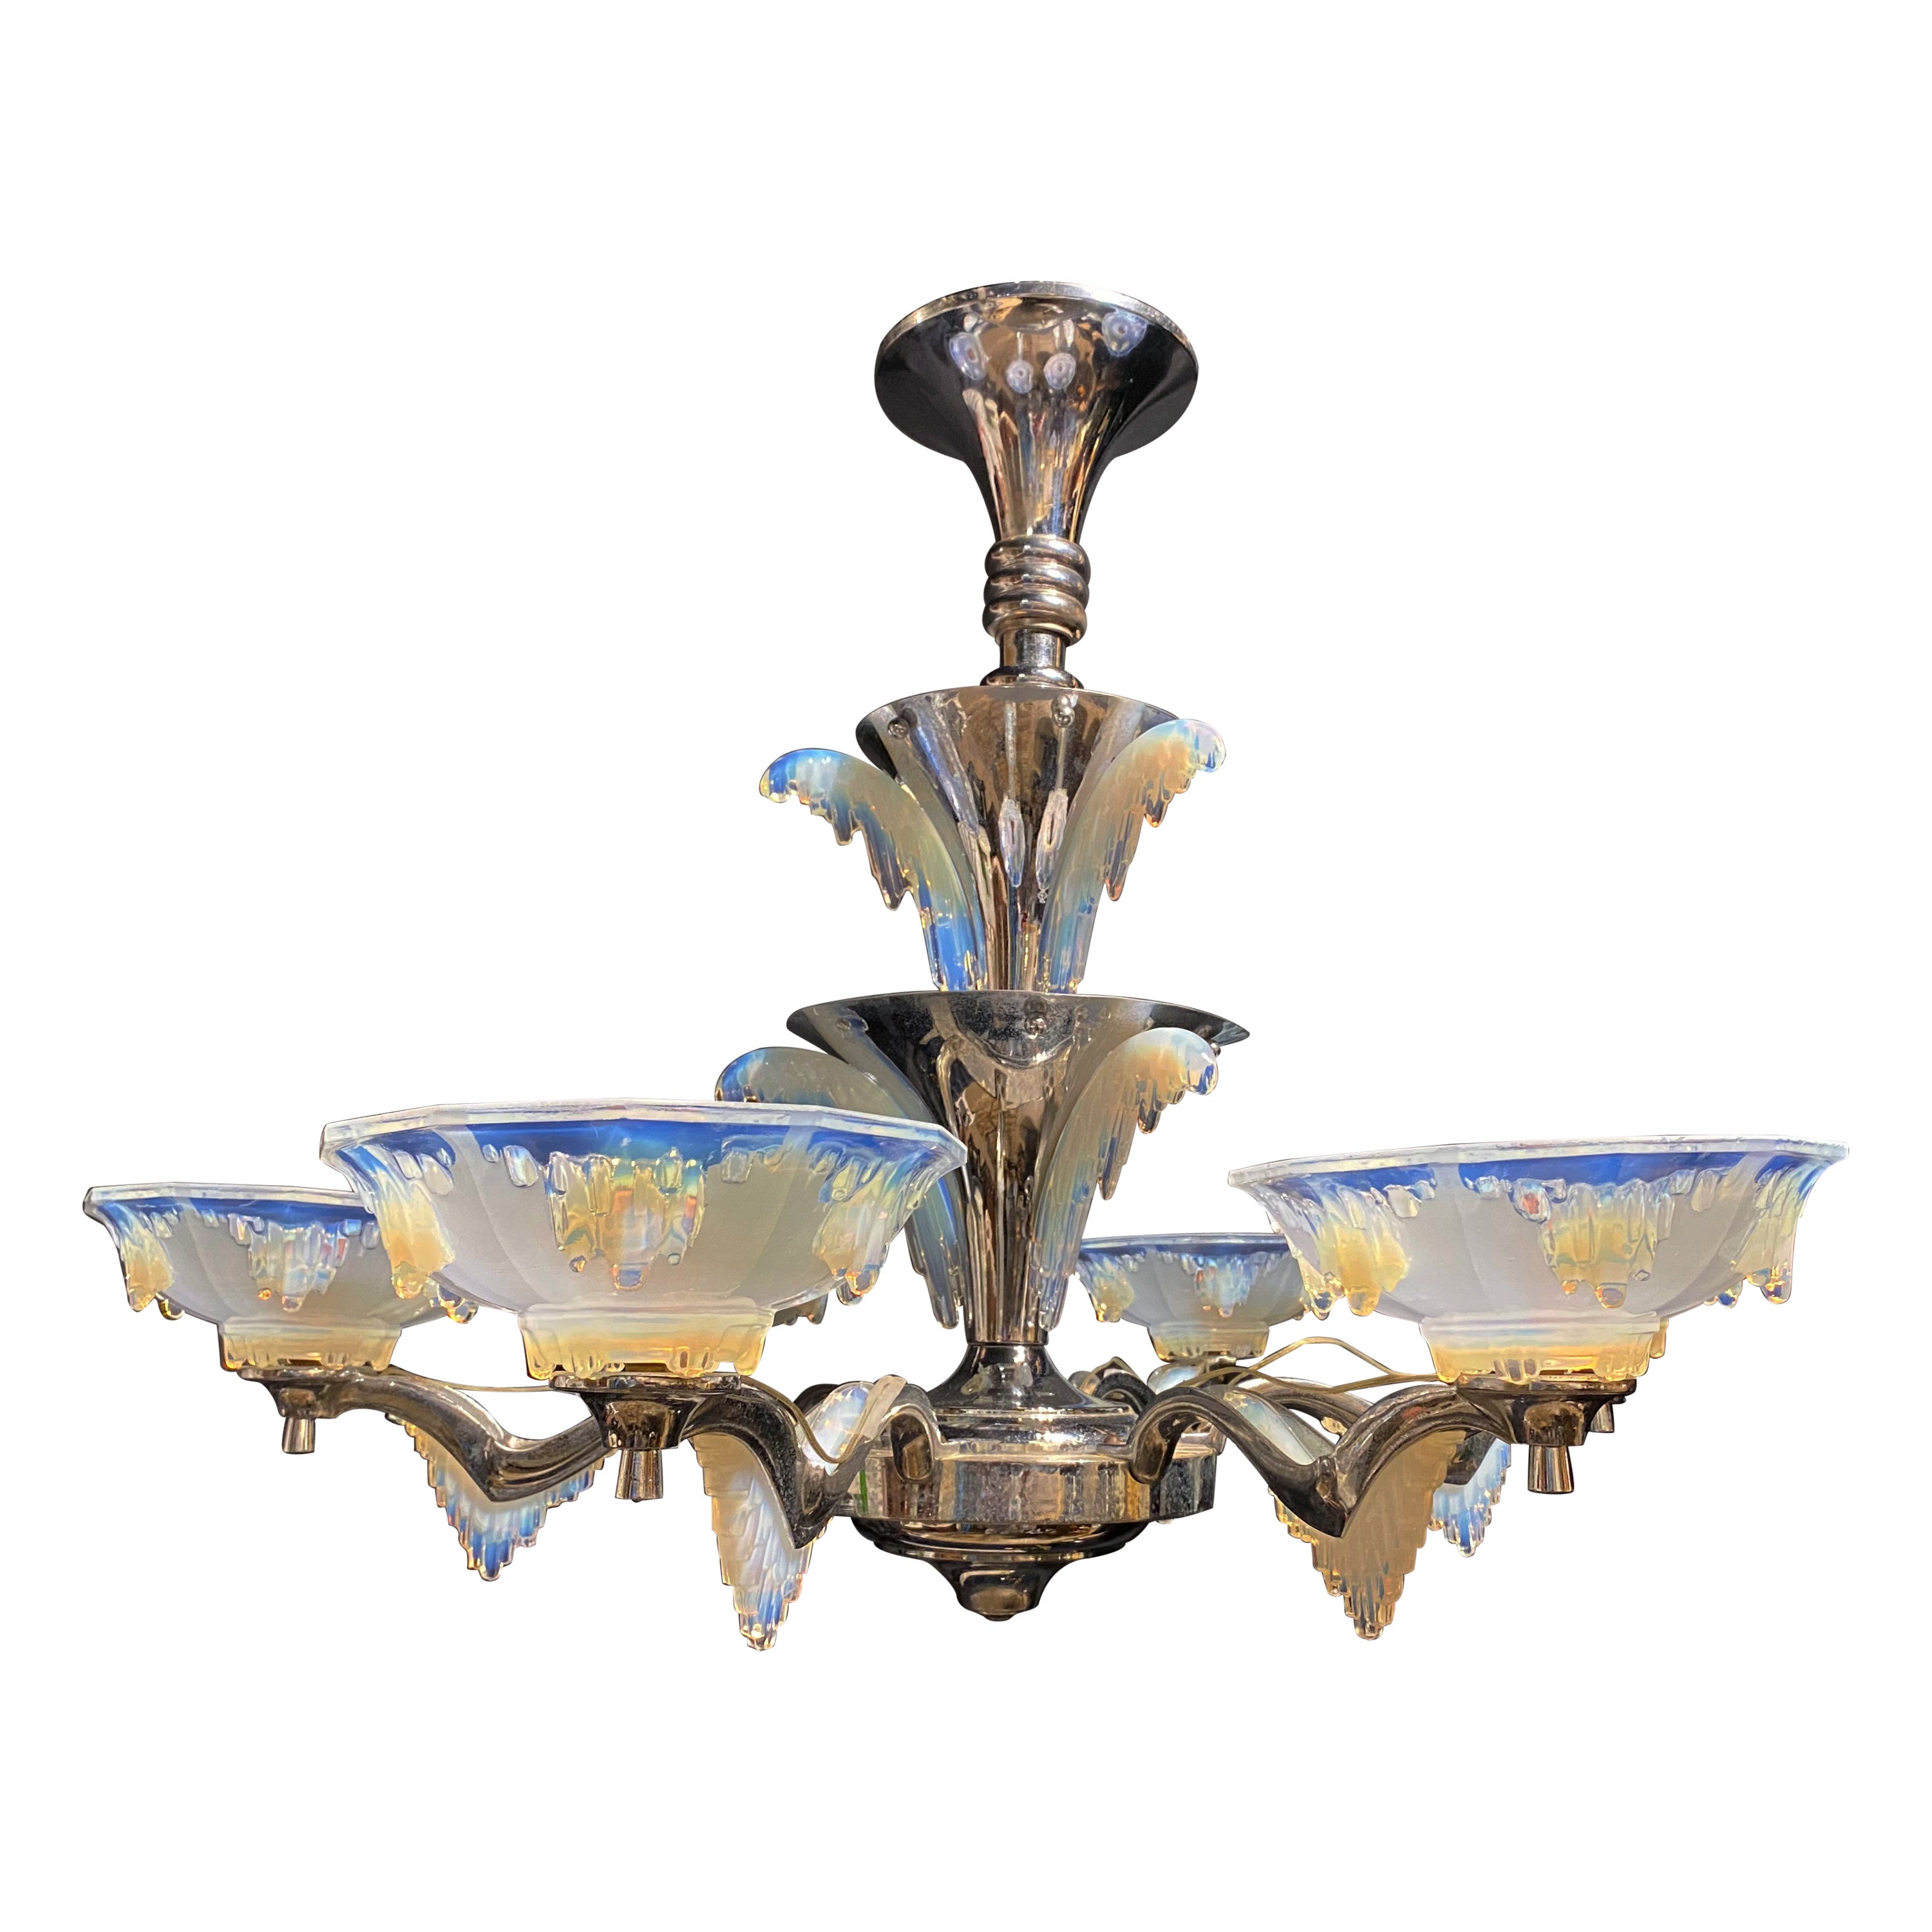  Opalescent Icicle Art Deco Chandelier In the Manner of Petitot & Ezan For Sale